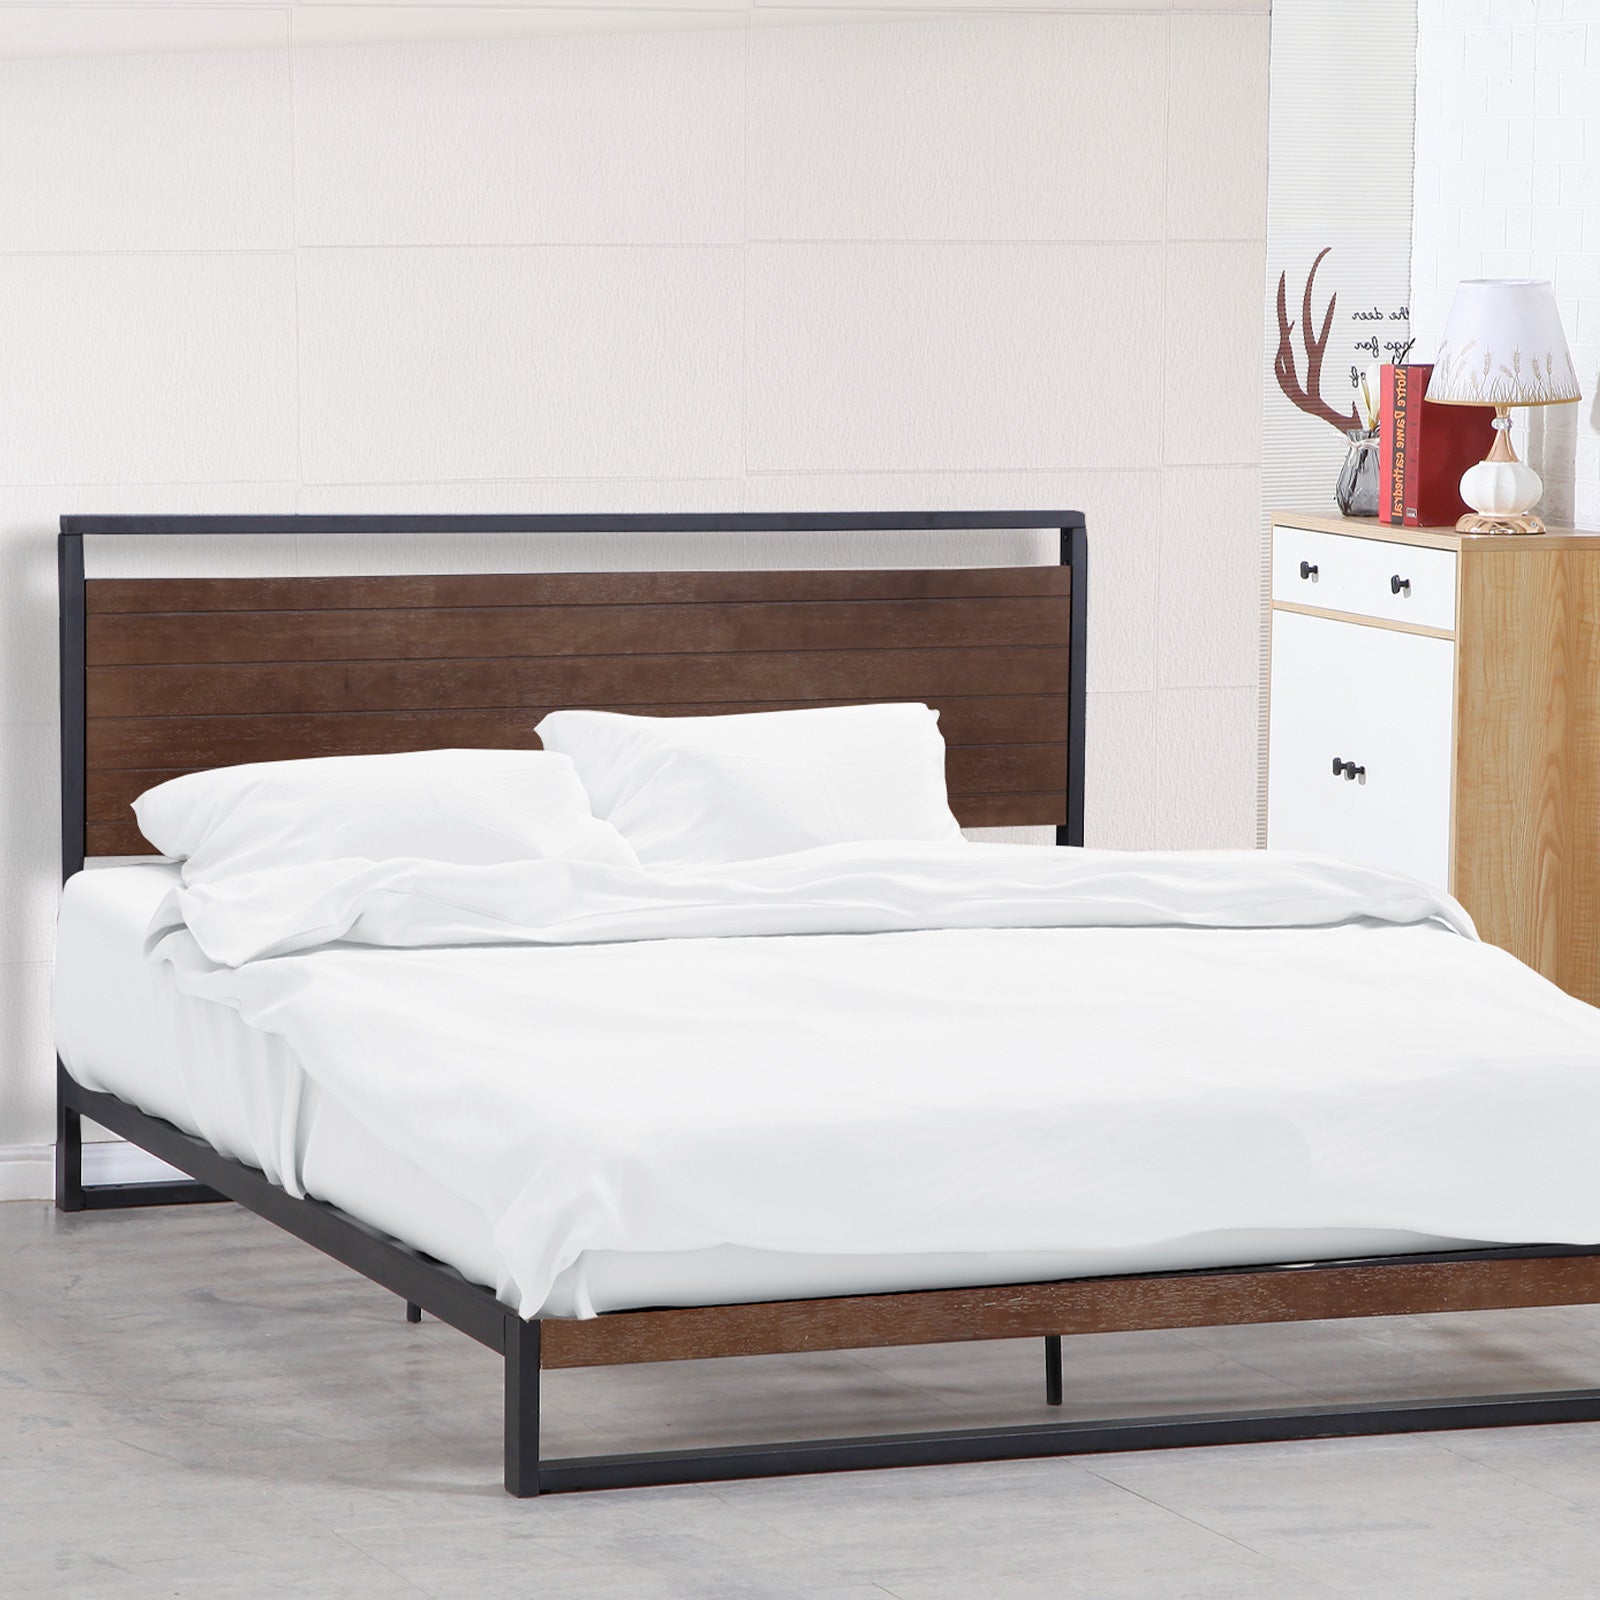 Azure Wood Bed Frame With Comforpedic Mattress Package Deal Bedroom Set - King - White  Brown